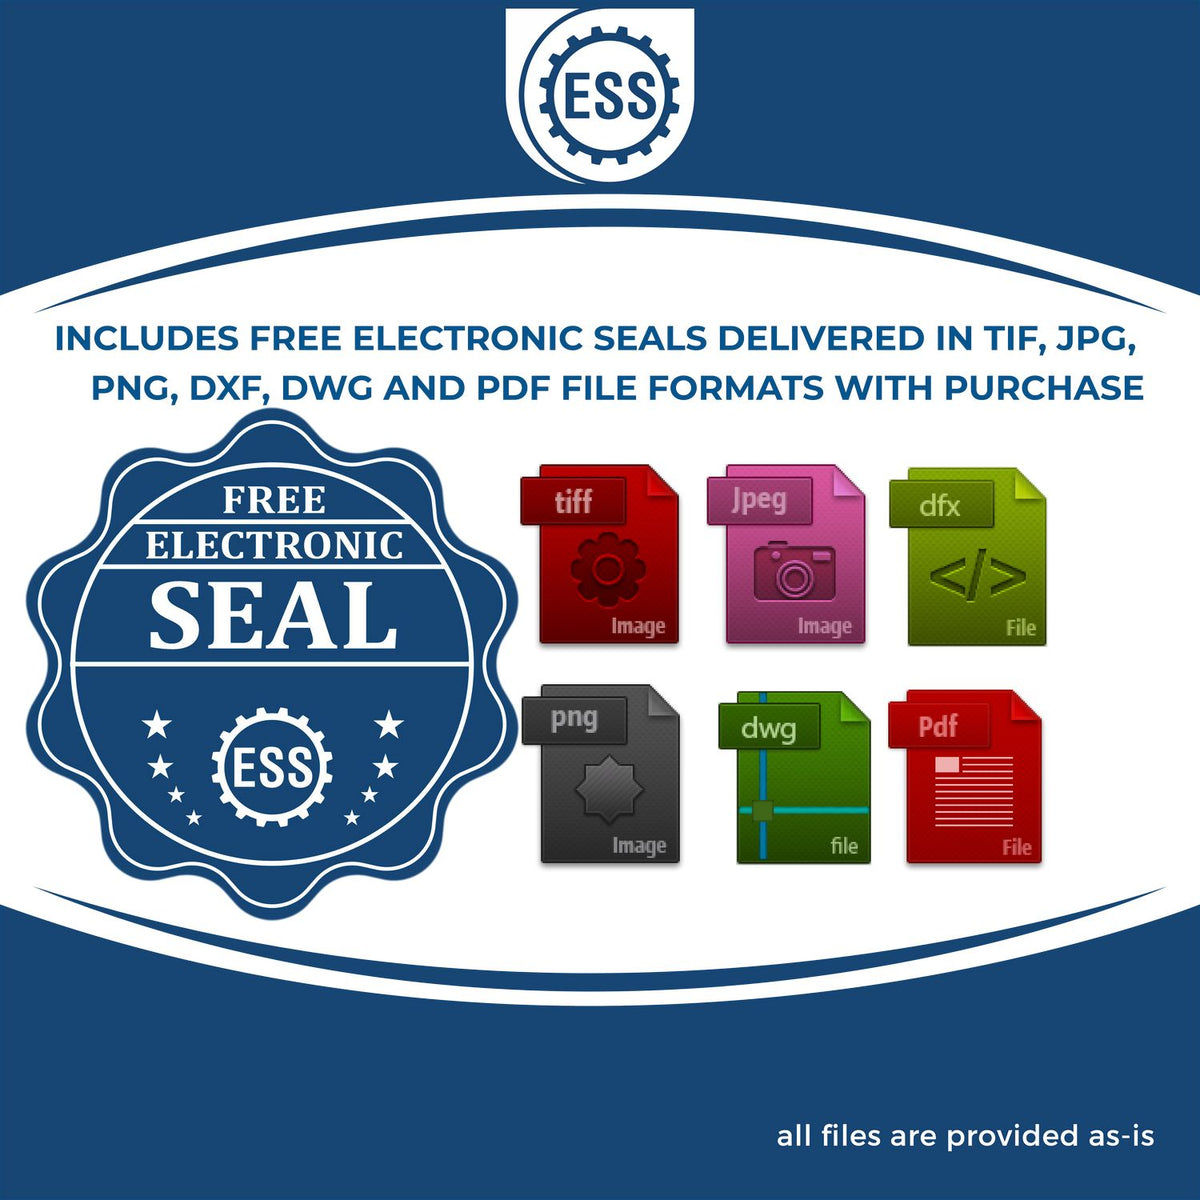 An infographic for the free electronic seal for the Handheld Pennsylvania Professional Geologist Embosser illustrating the different file type icons such as DXF, DWG, TIF, JPG and PNG.